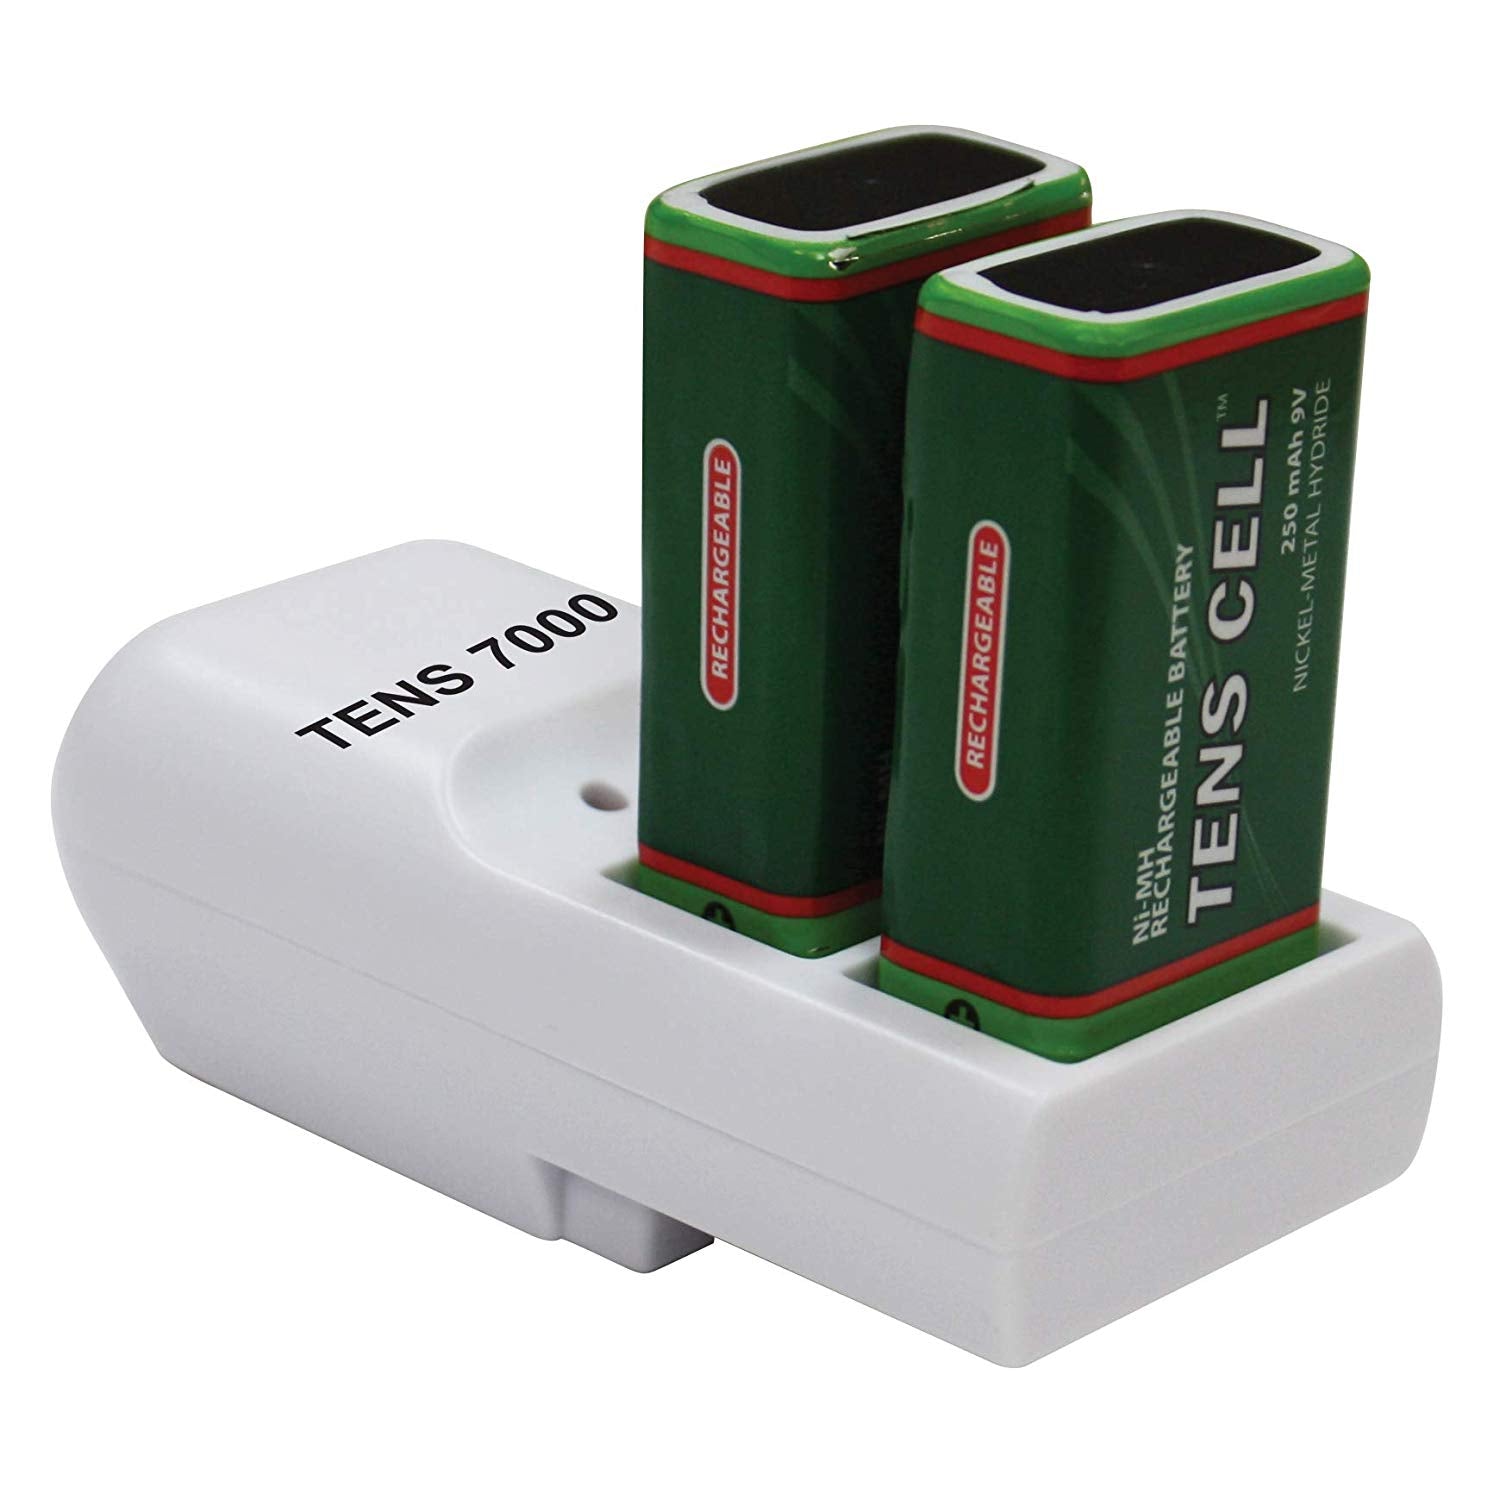 Tens 7000 Official Rechargeable 9V Batteries Kit - Includes NiMH/NiCd Charger and 2 Rechargable 9 Volt Batteries - Tens Unit Battery Pack